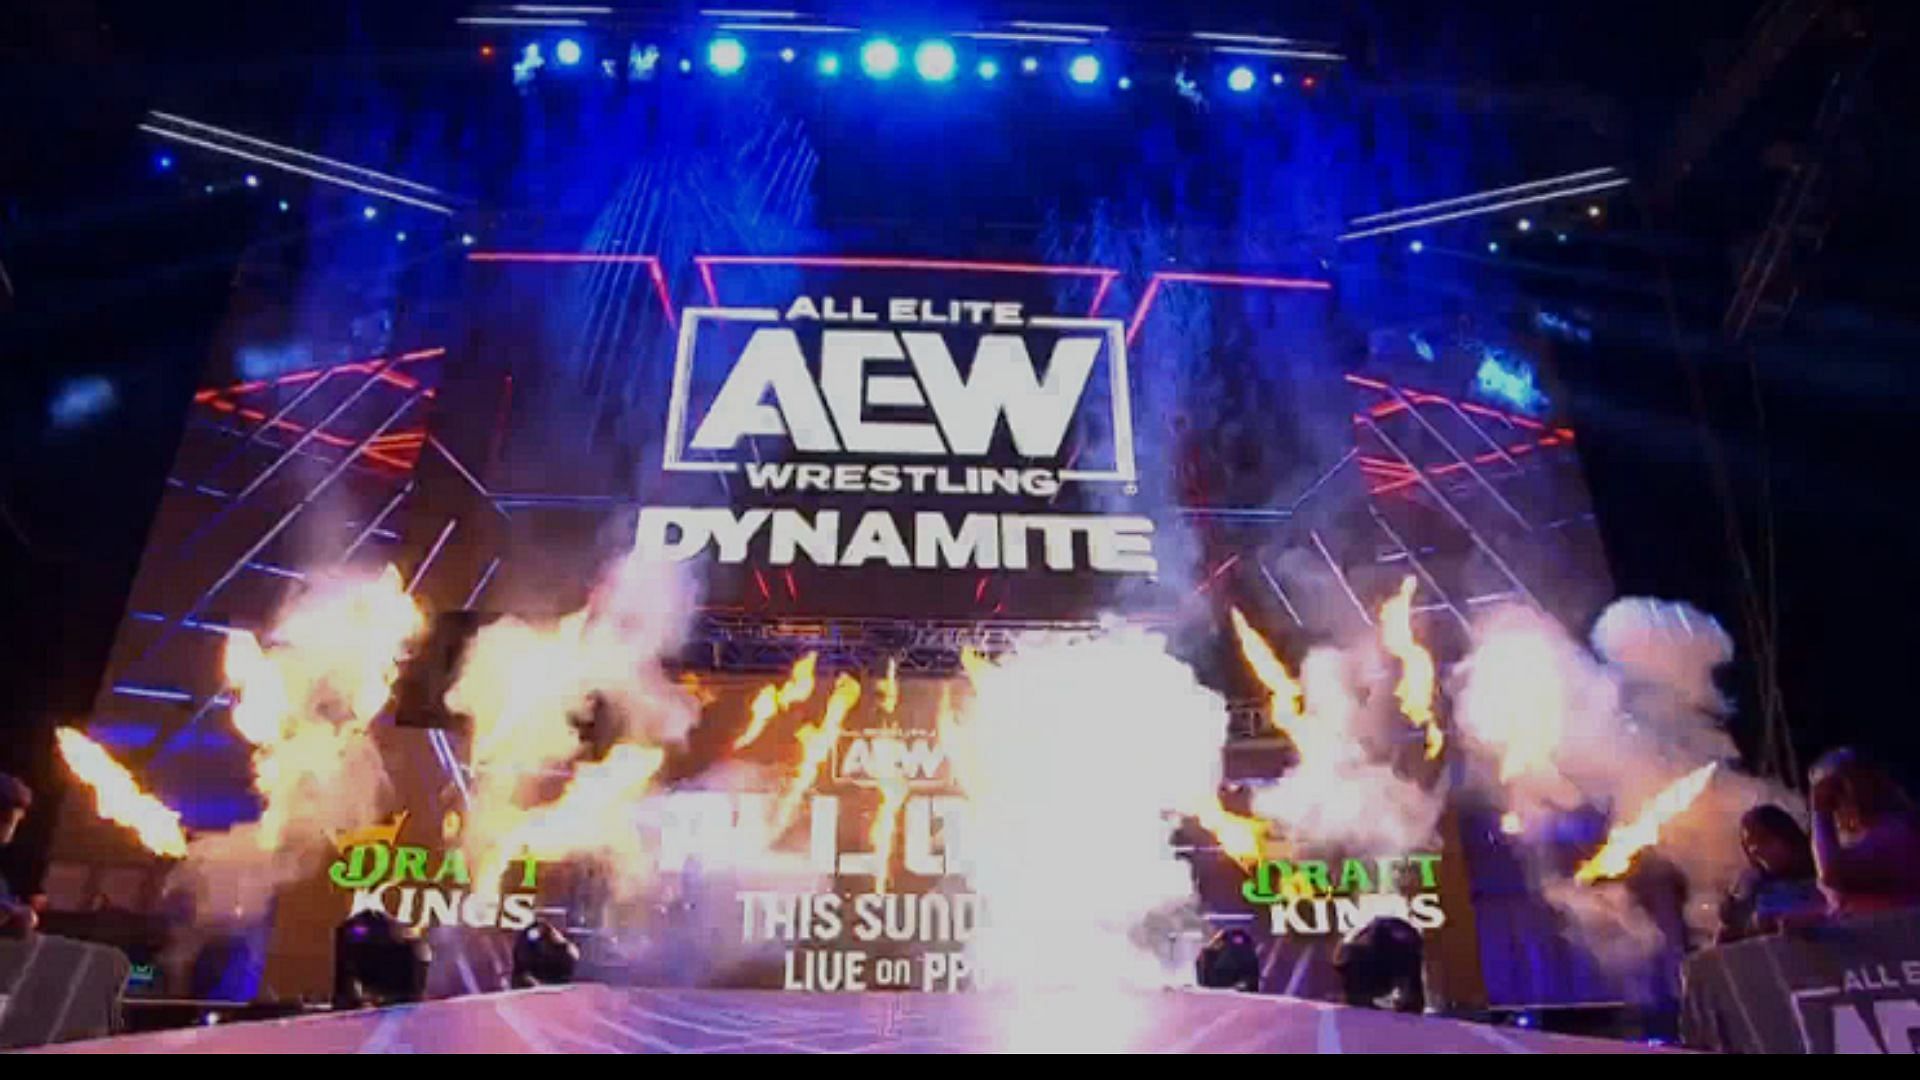 AEW Dynamite is the weekly Wednesday show of the promotion